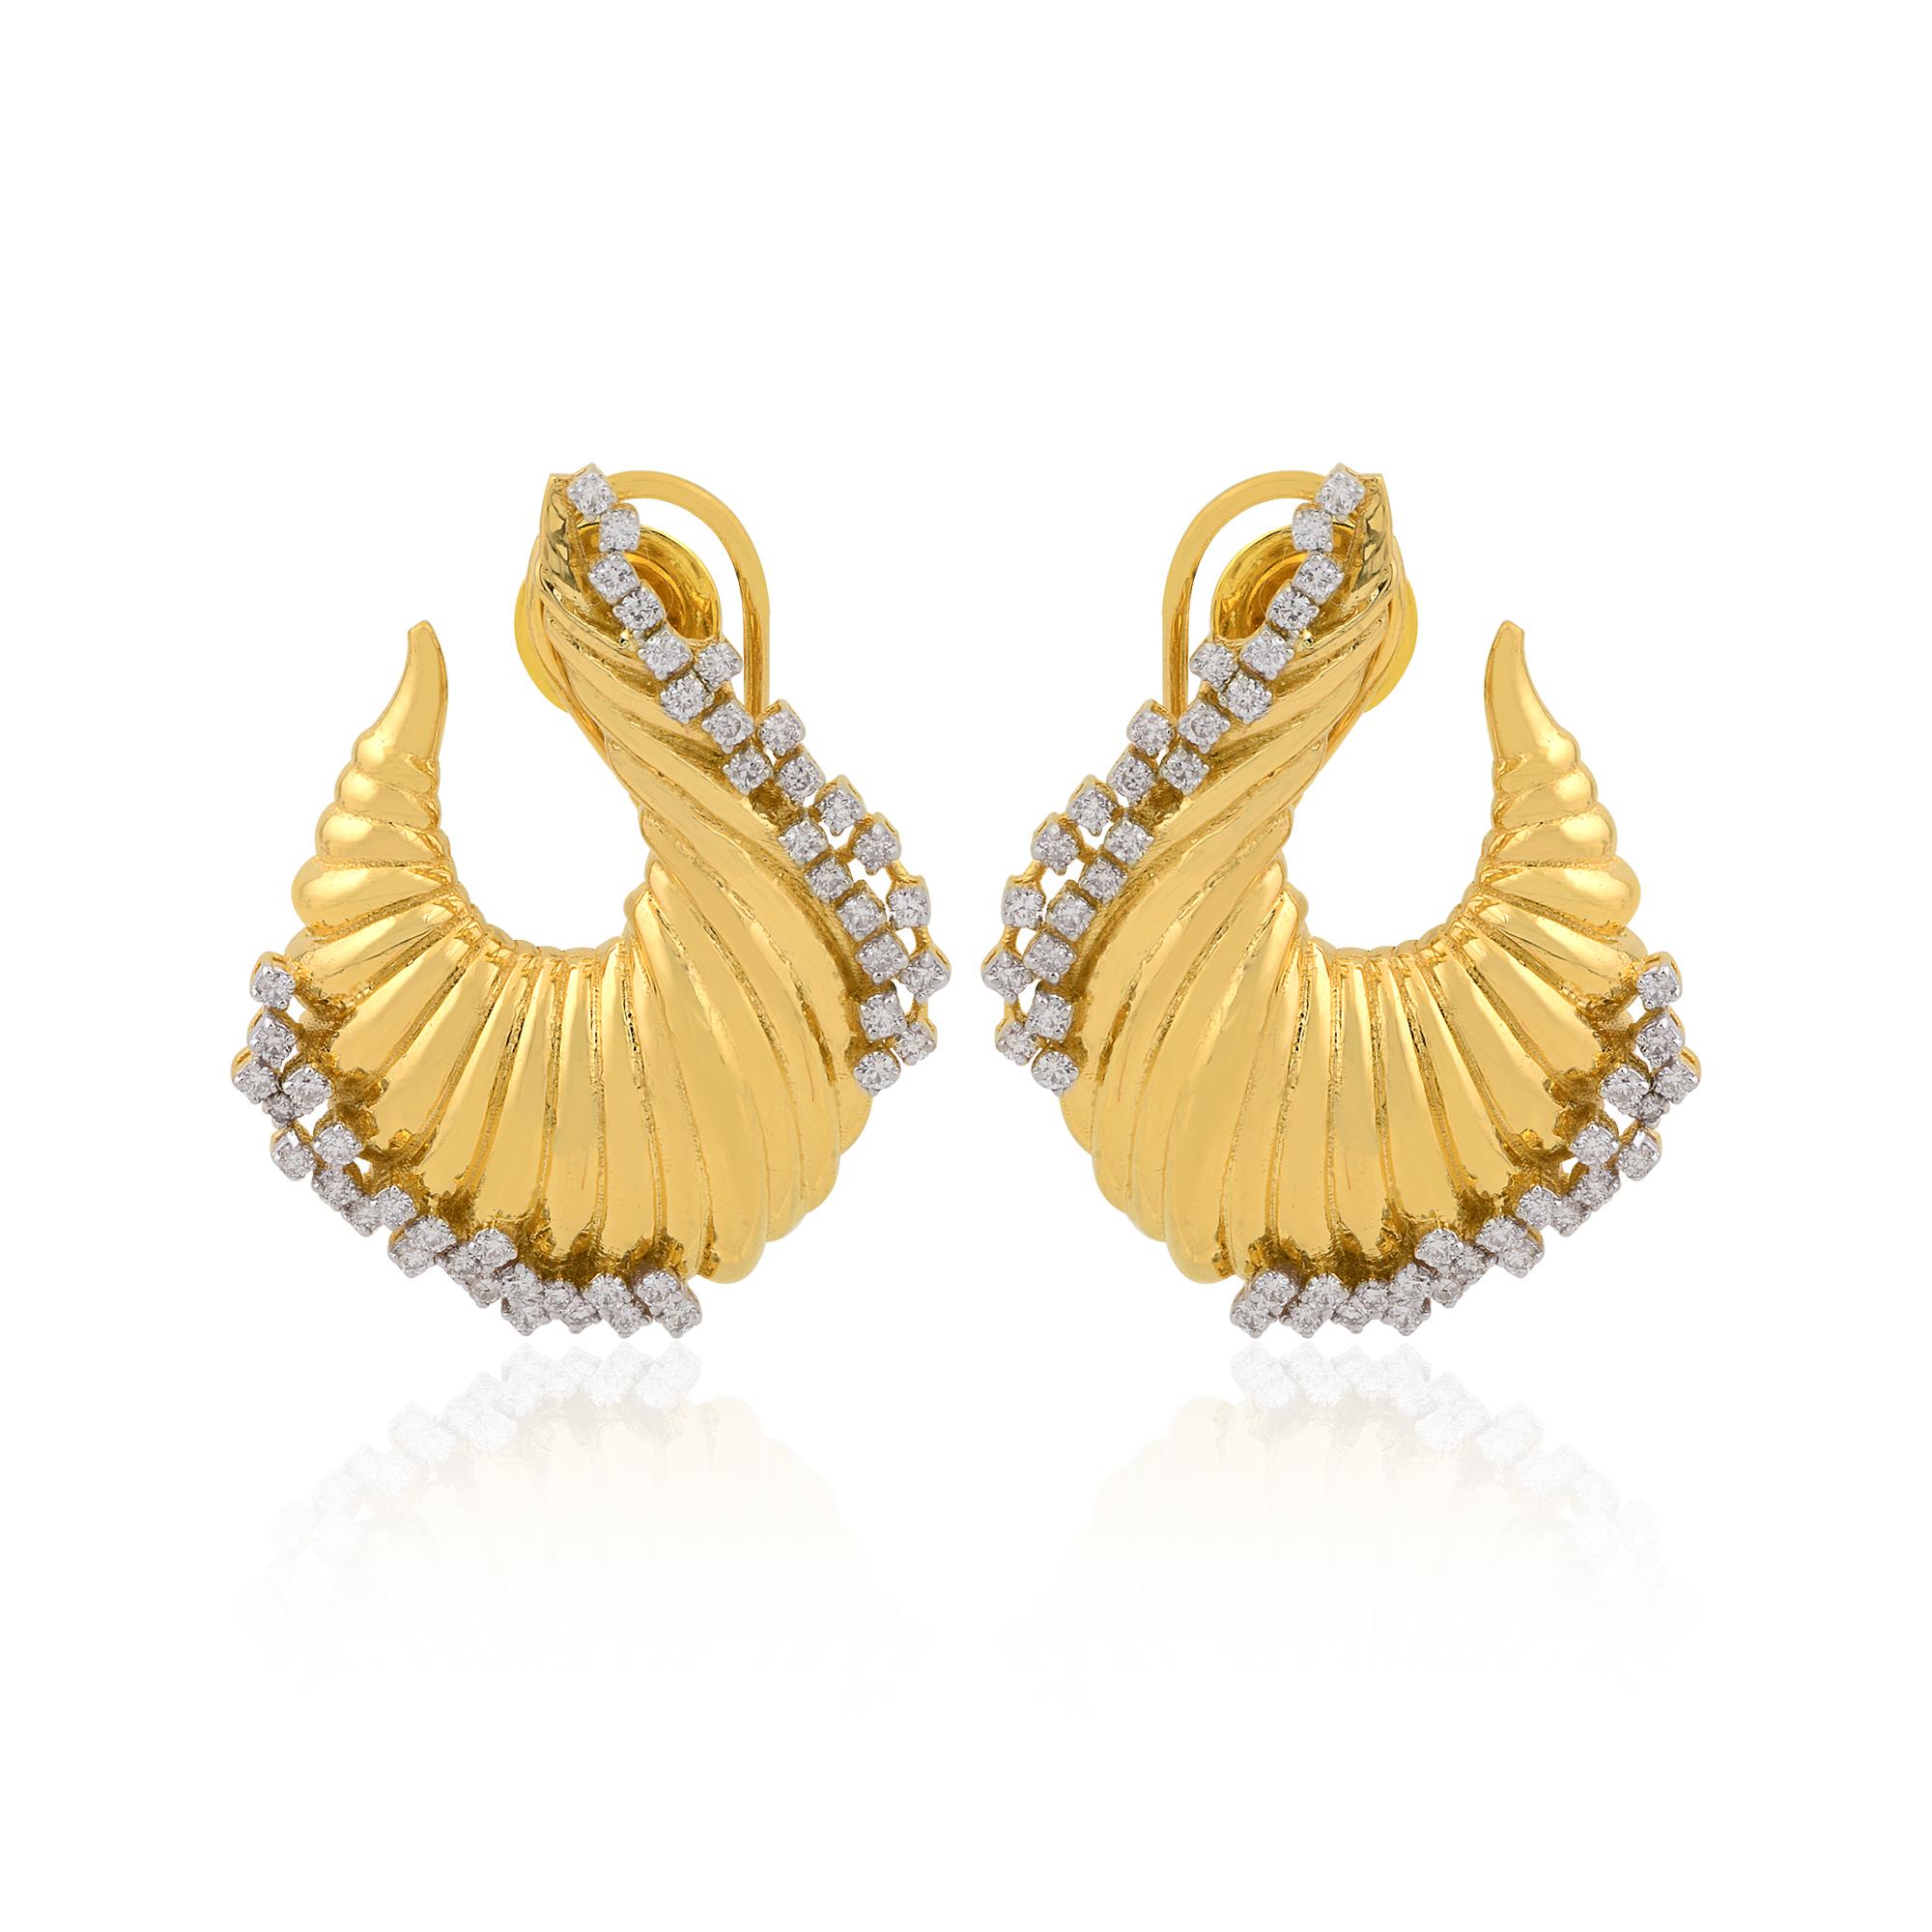 Item Code :- SEE-1674A
Gross Weight :- 9.42 gm
14k Solid Yellow Gold Weight :- 9.25 gm
Natural Diamond Weight :- 0.85 carat  ( AVERAGE DIAMOND CLARITY SI1-SI2 & COLOR H-I )
Earrings Size :- 29x20 mm approx.

✦ Sizing
.....................
We can